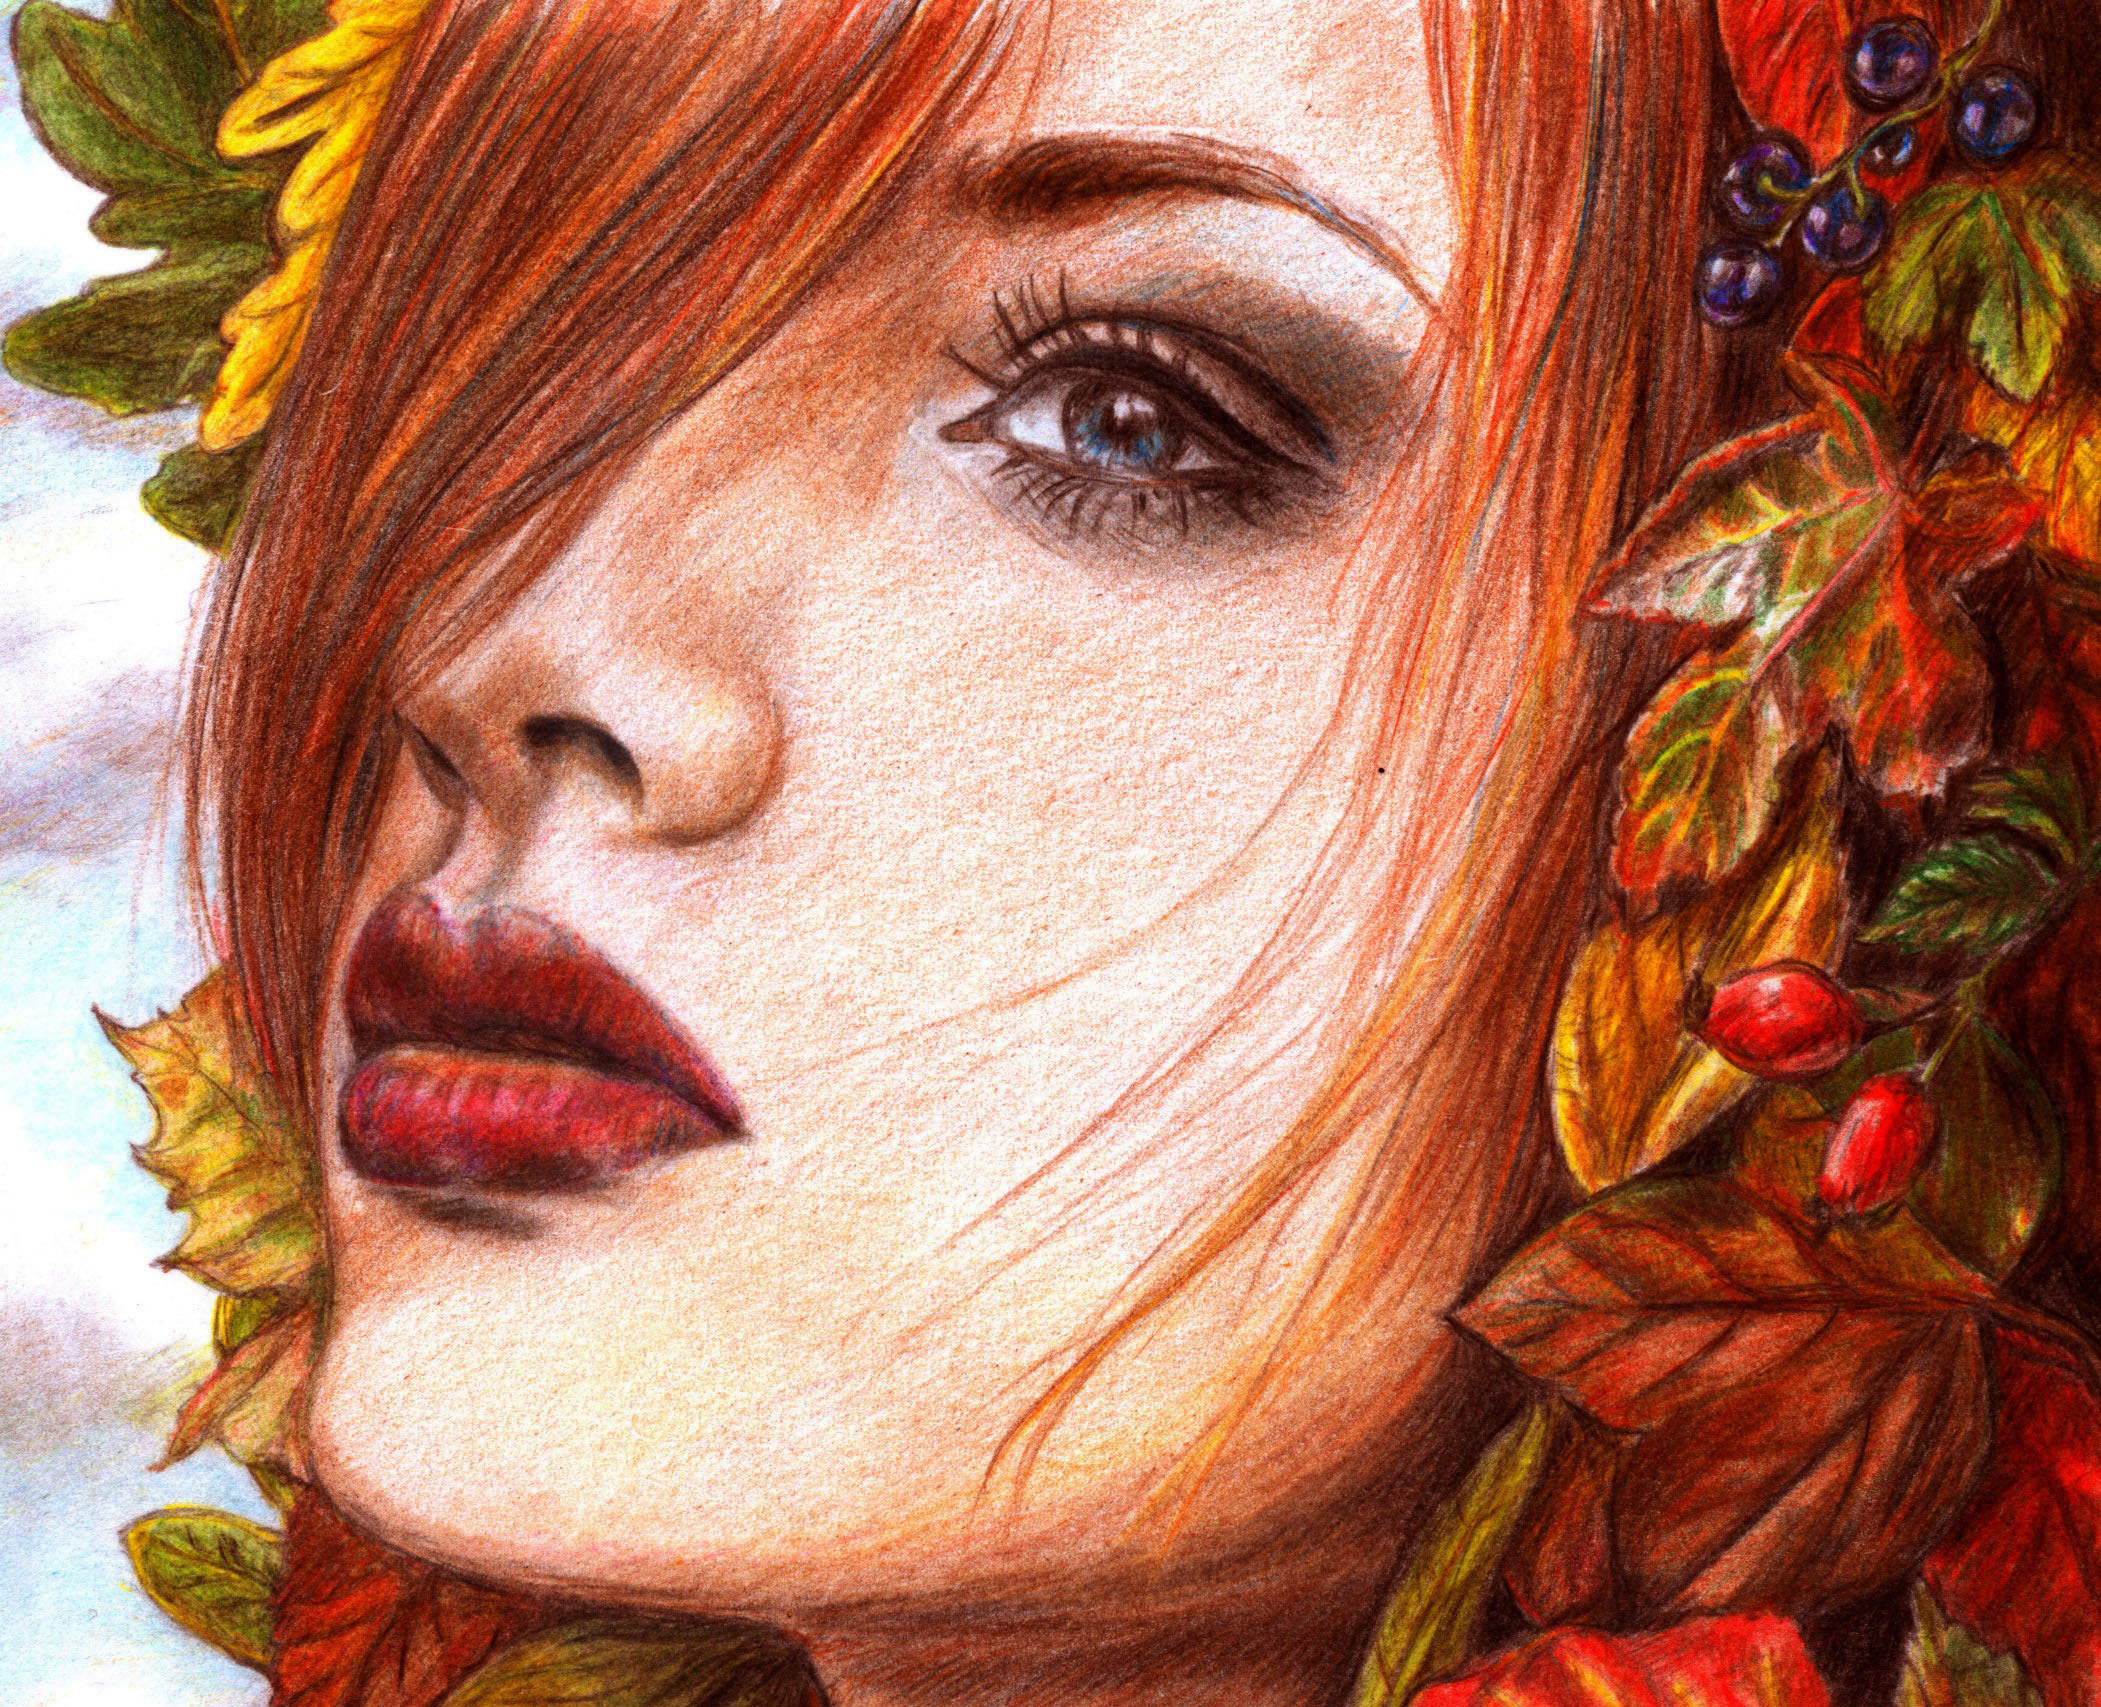 Wallpaper, 2101x1707 px, ART, eyes, face, girl, girls, glance, hair, lips, painting, red, redhead 2101x1707